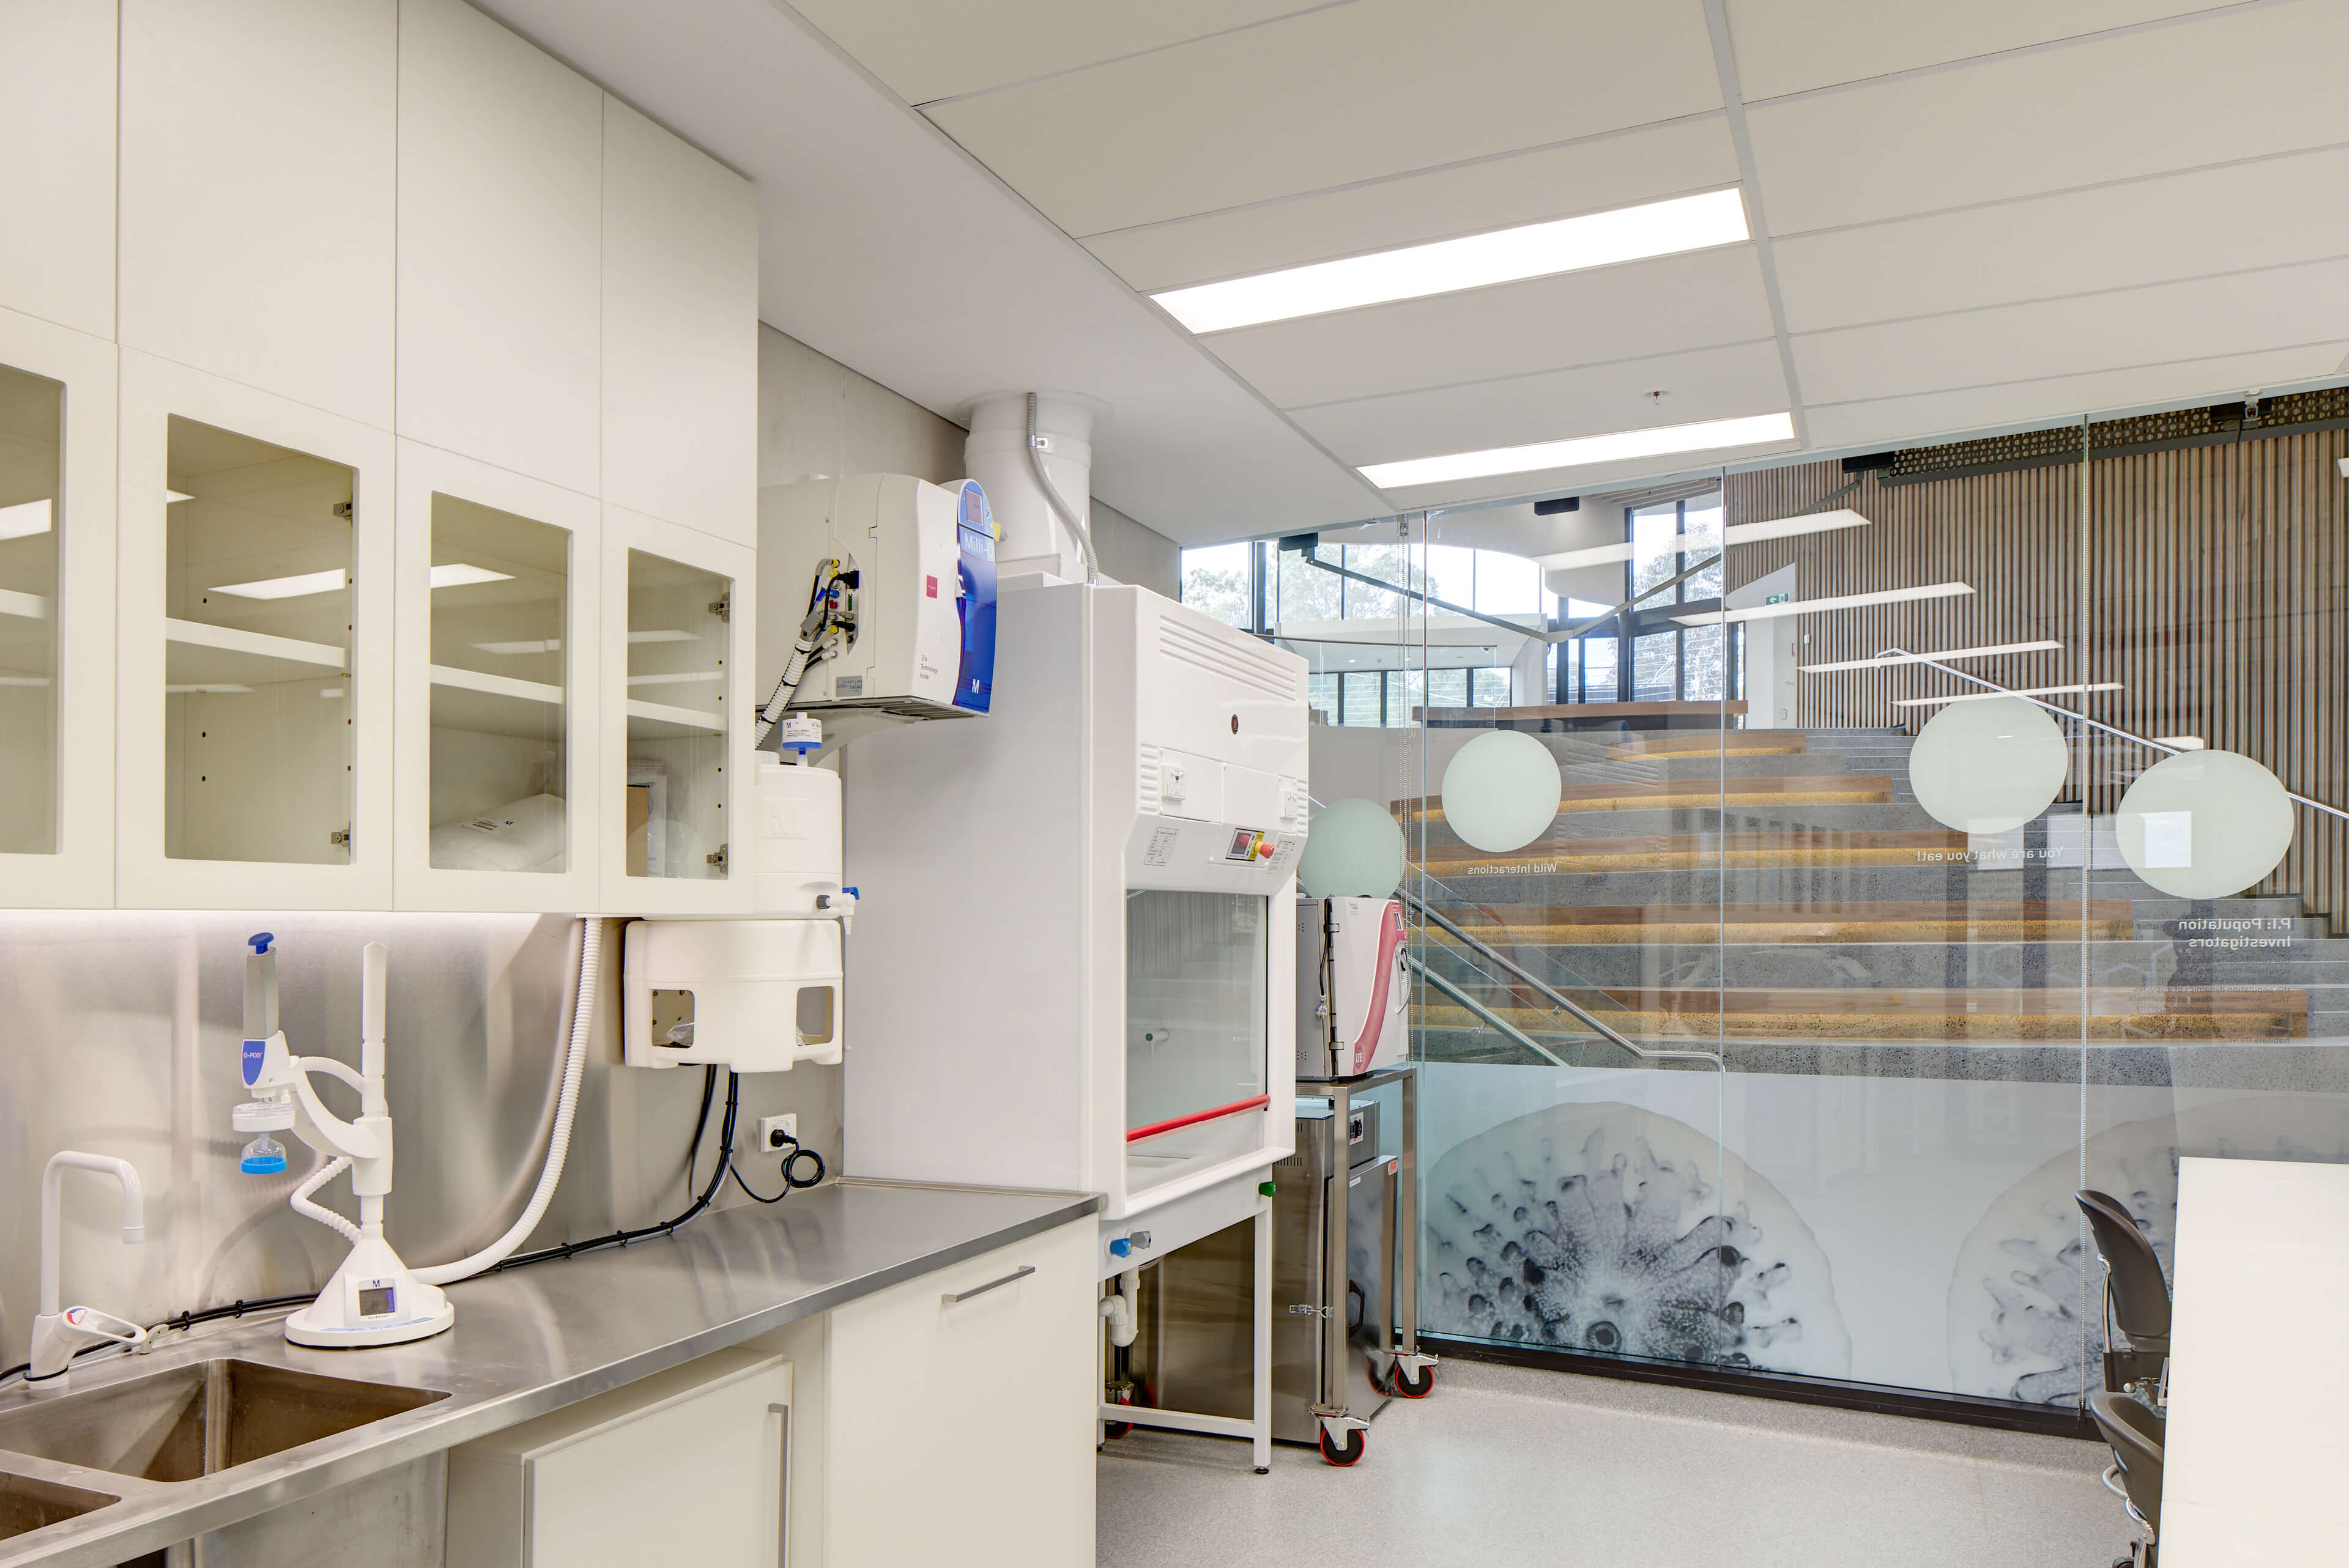 16 interior of lab for tarongas science team at taronga zoo institute sydney taylor construction education